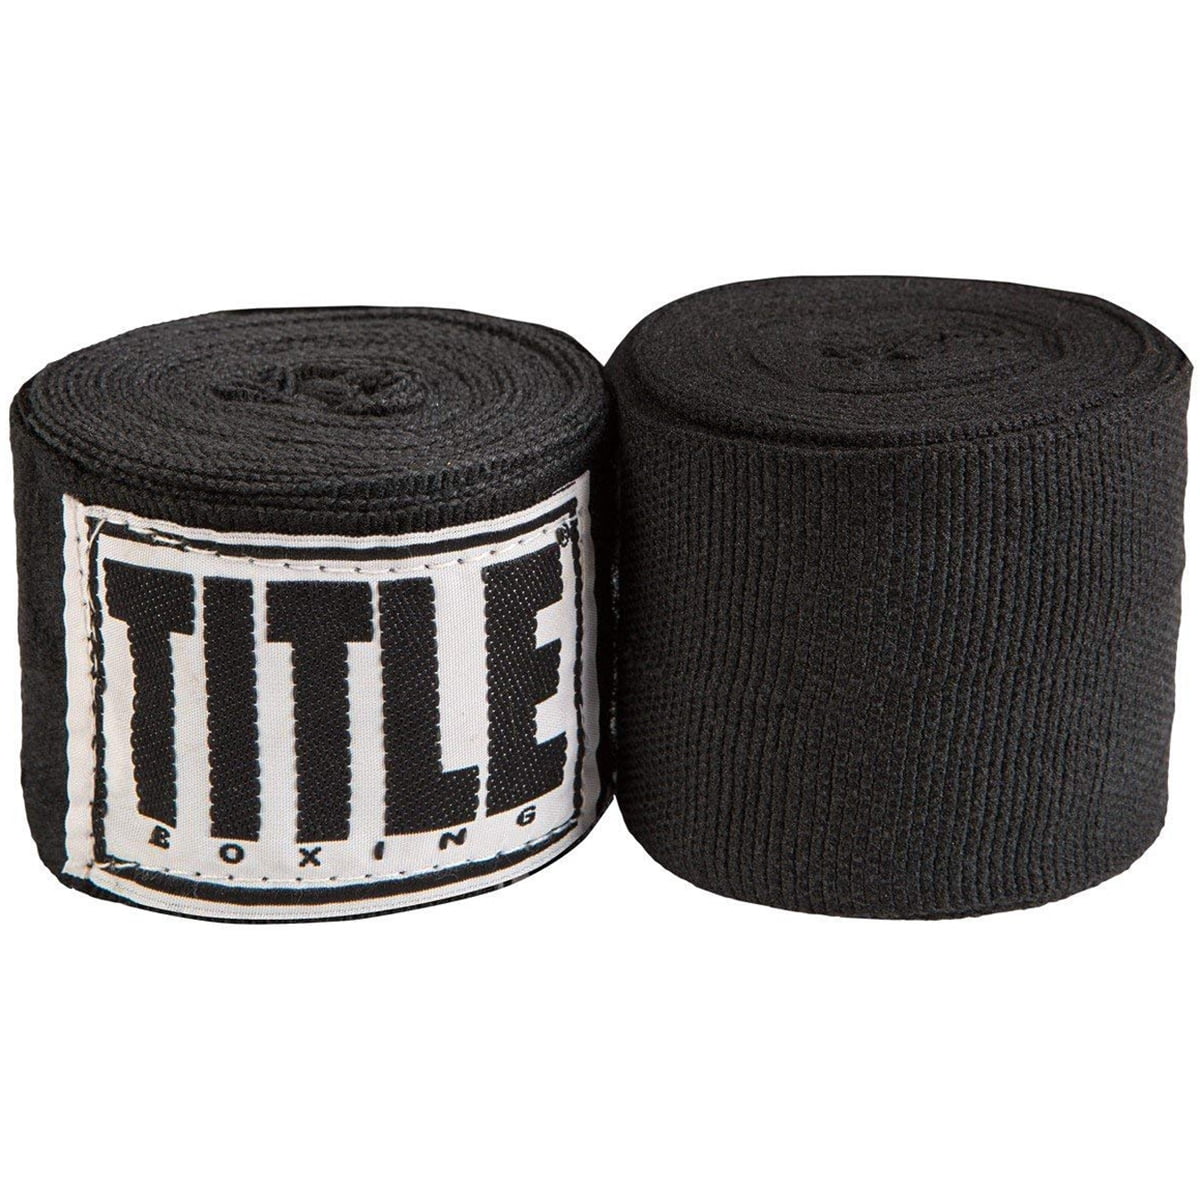 Black 180-Inch Ringside Mexican-Style Boxing Handwrap